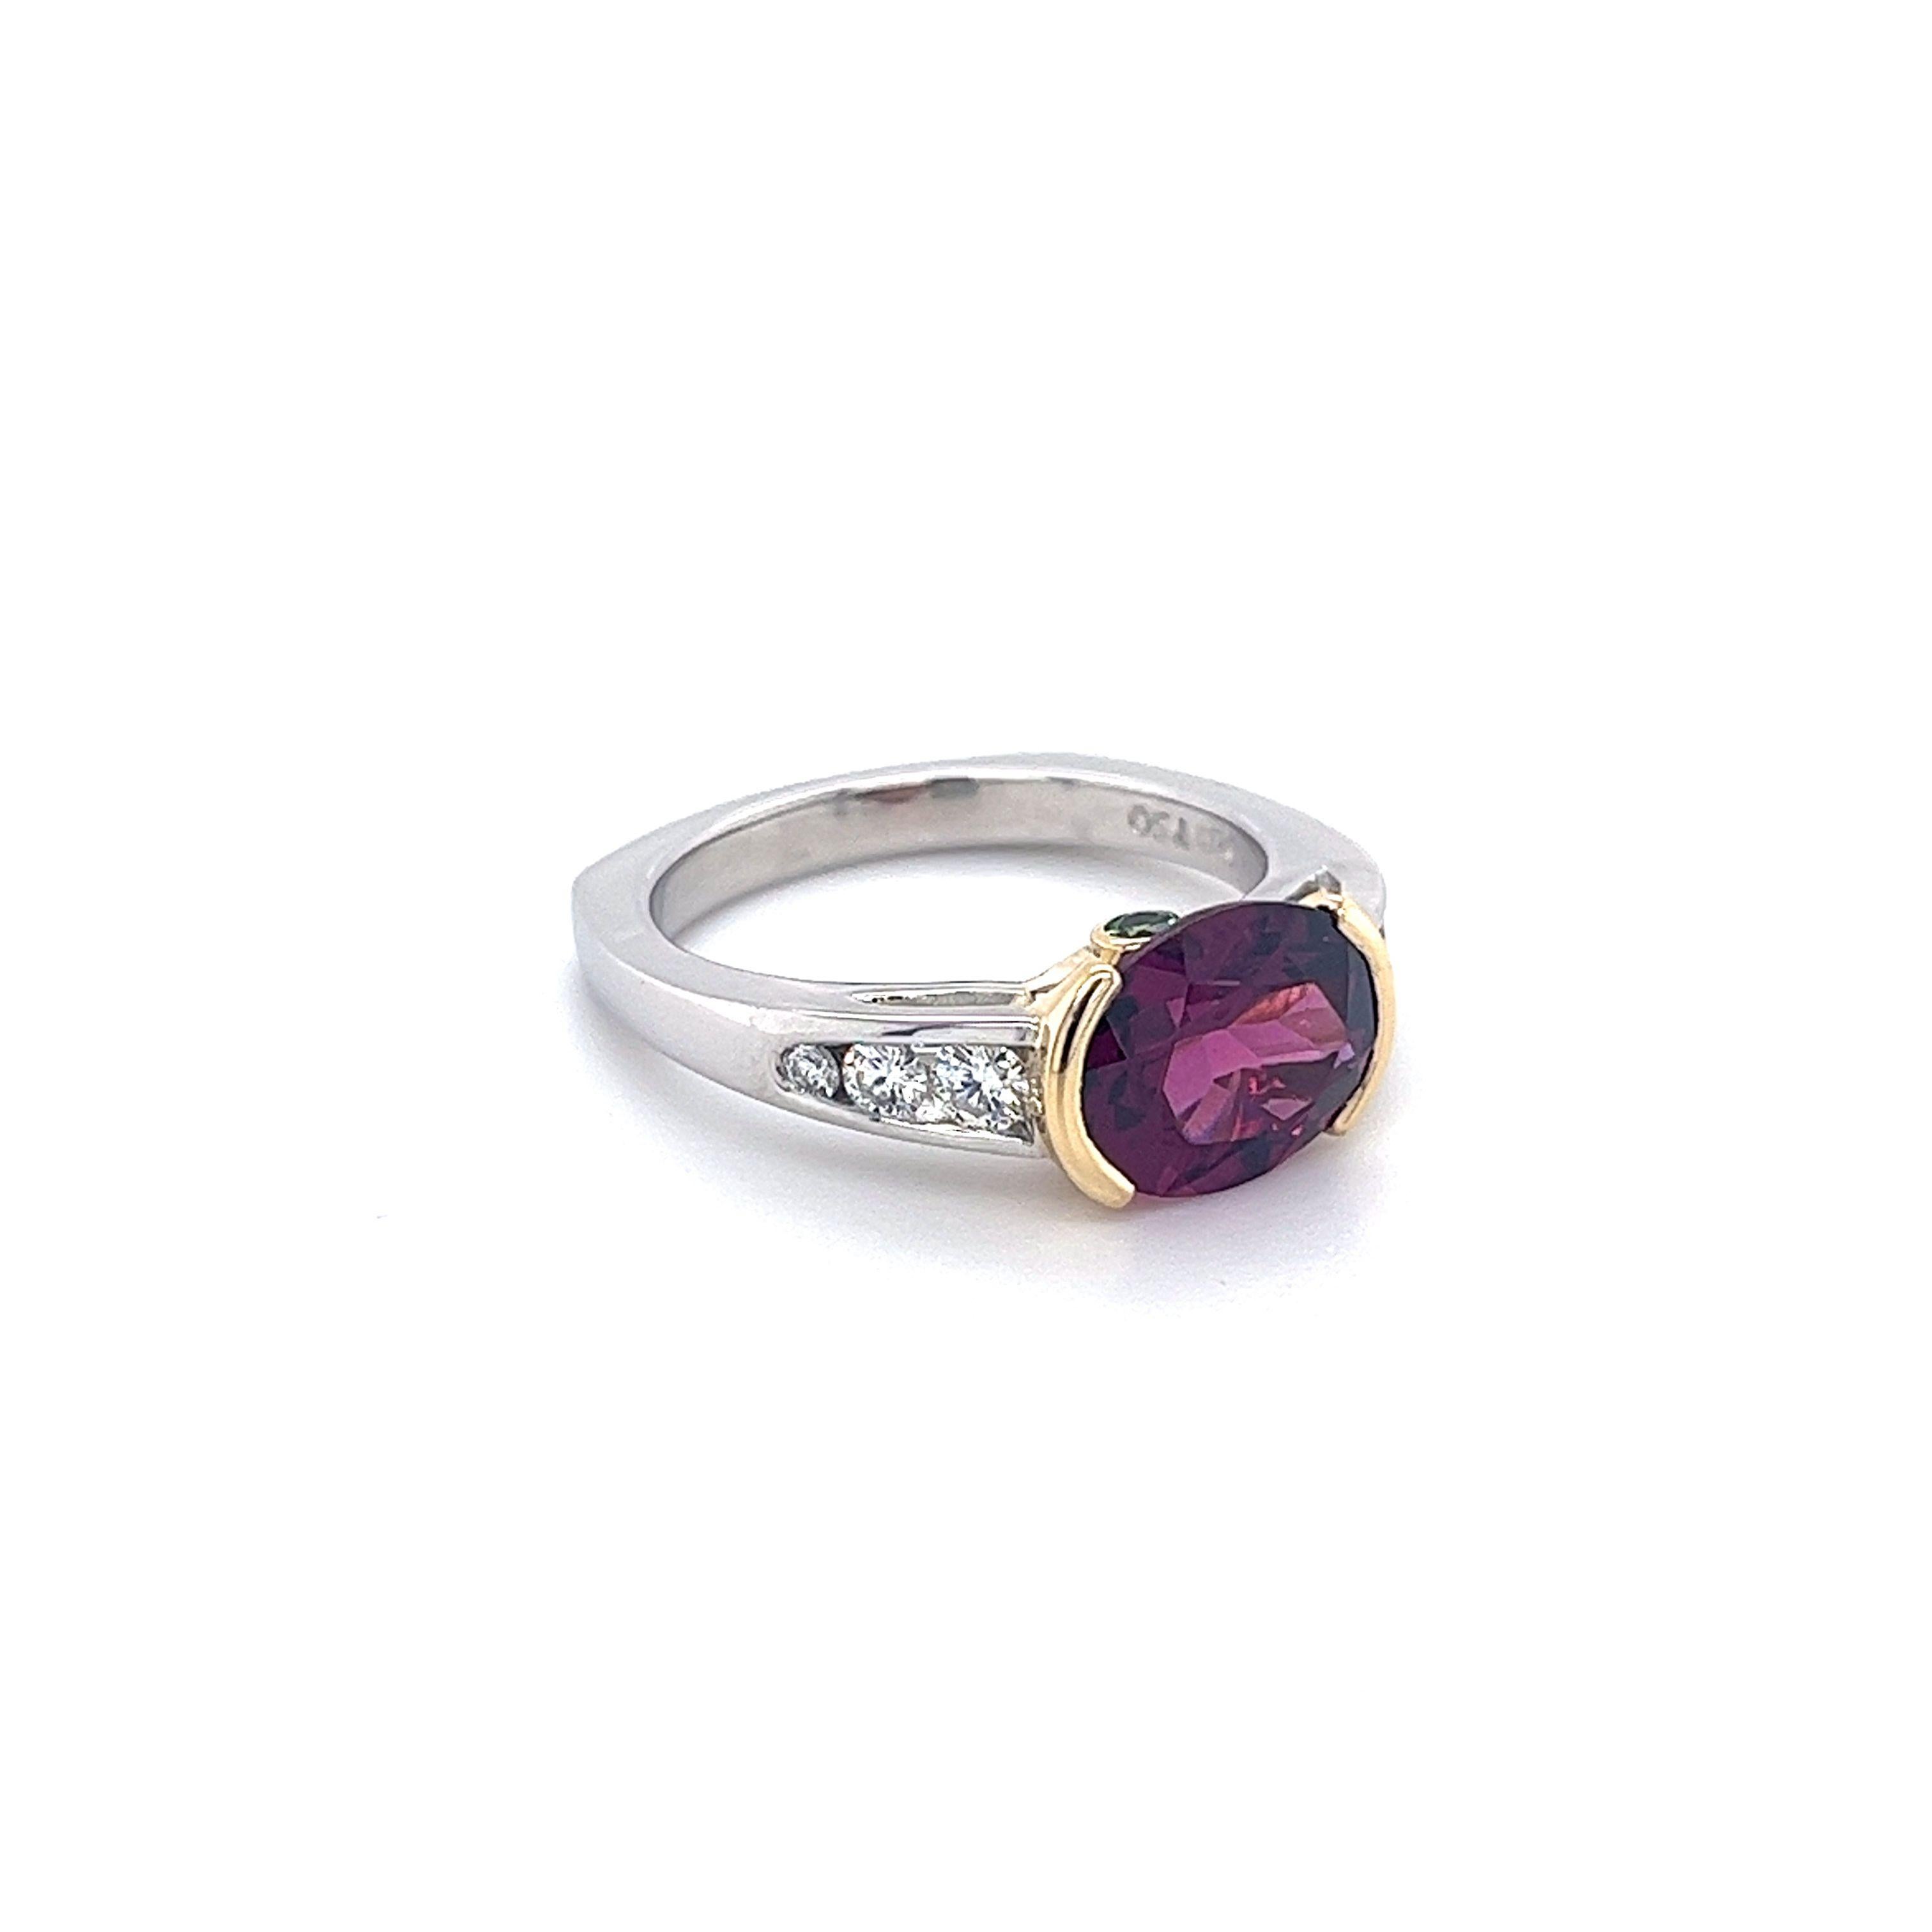 Women's 3.50 Carat Red Rubellite Tourmaline East West Ring in Platinum and 18K Gold For Sale